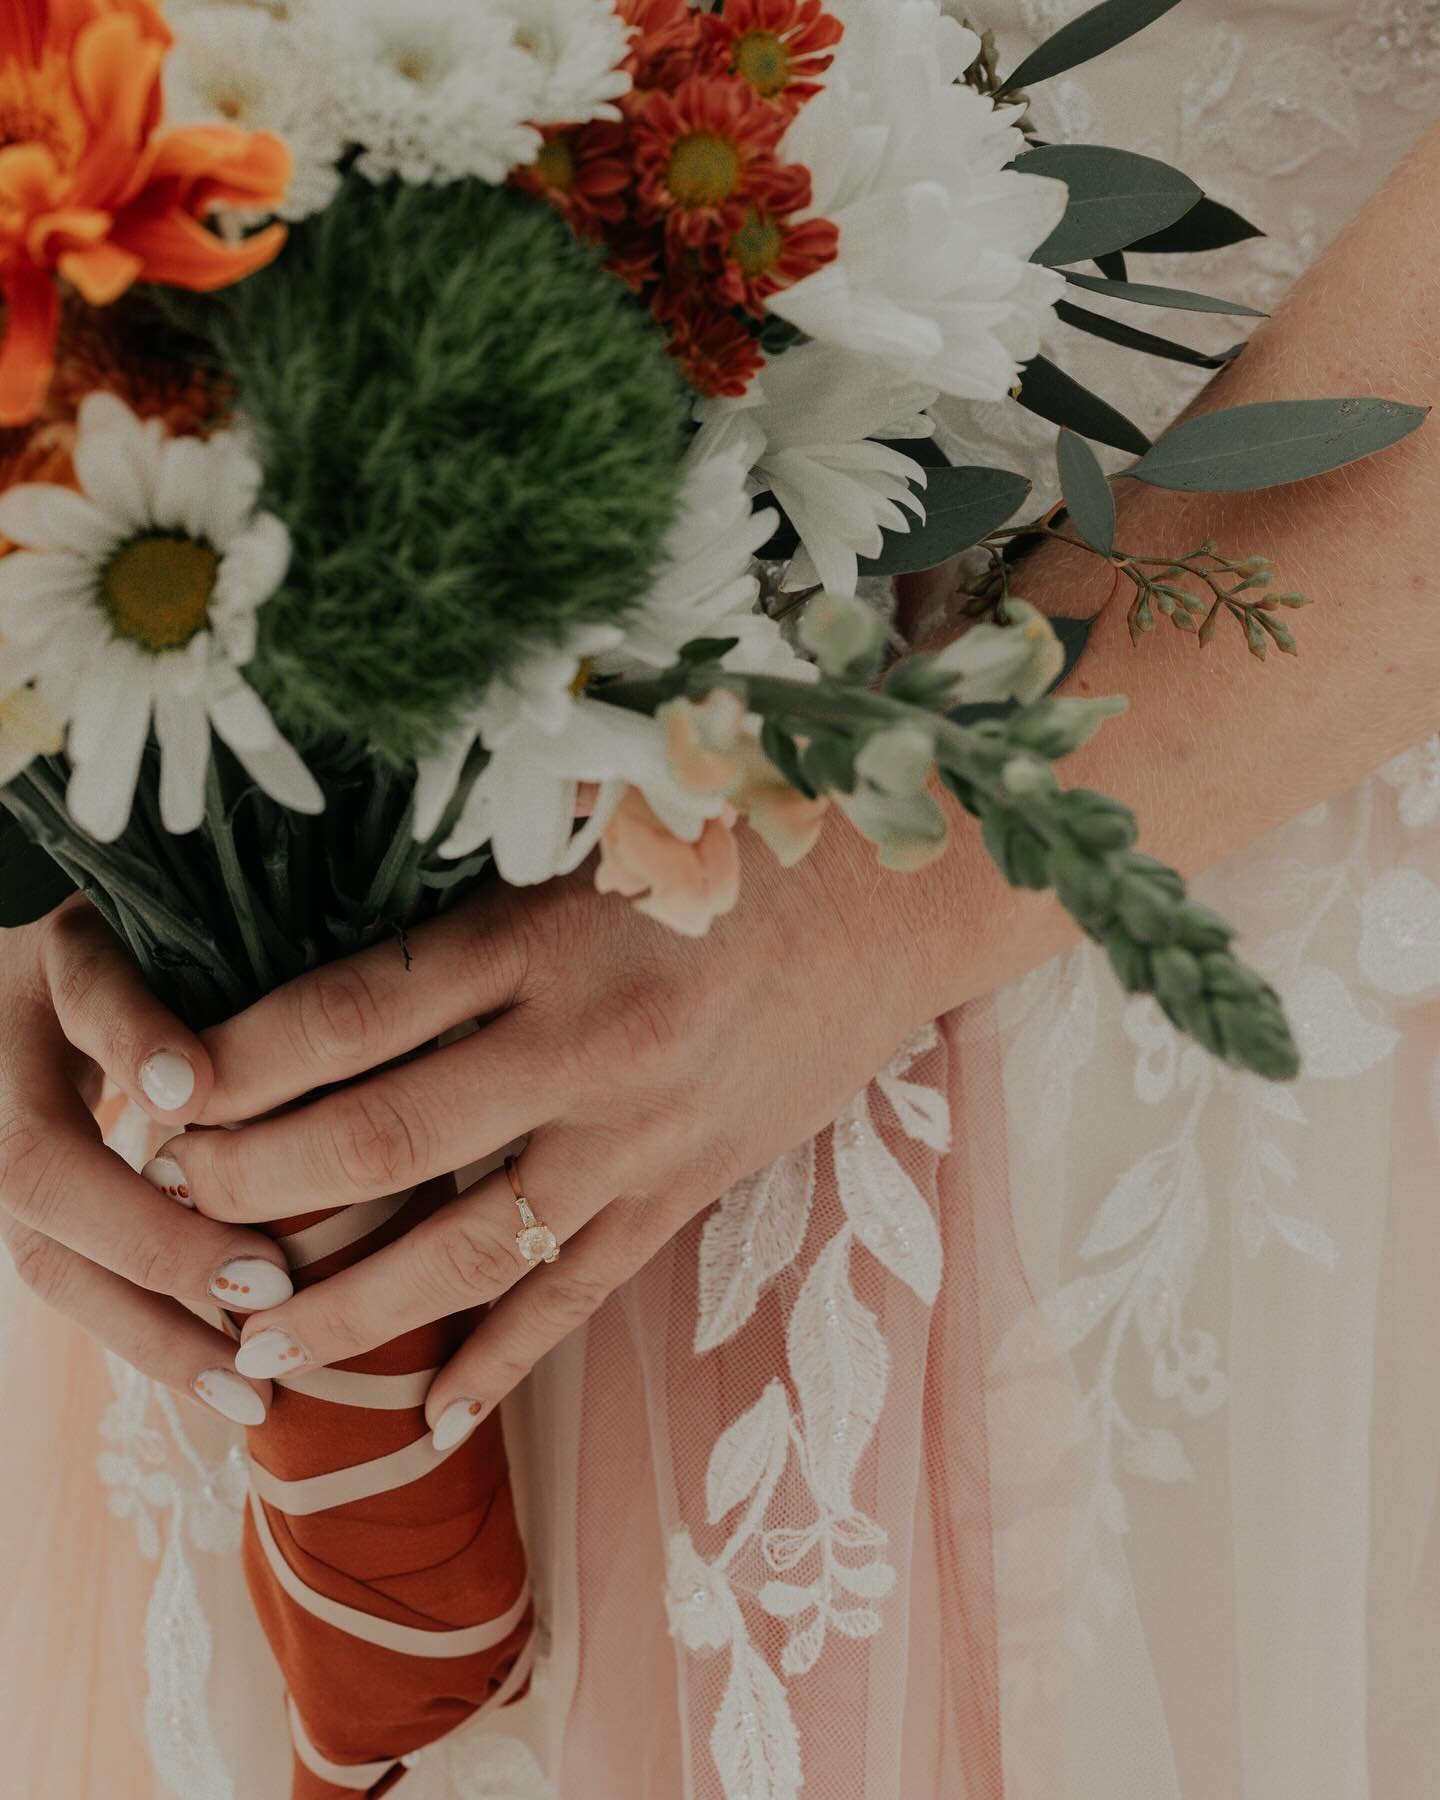 Make your wedding day your own ✨ what I mean by that is include all the things that make the day personal and special to the both of you 

Example: this bride added some color pop to her dress to fit true to the whimsical theme they were going for. A